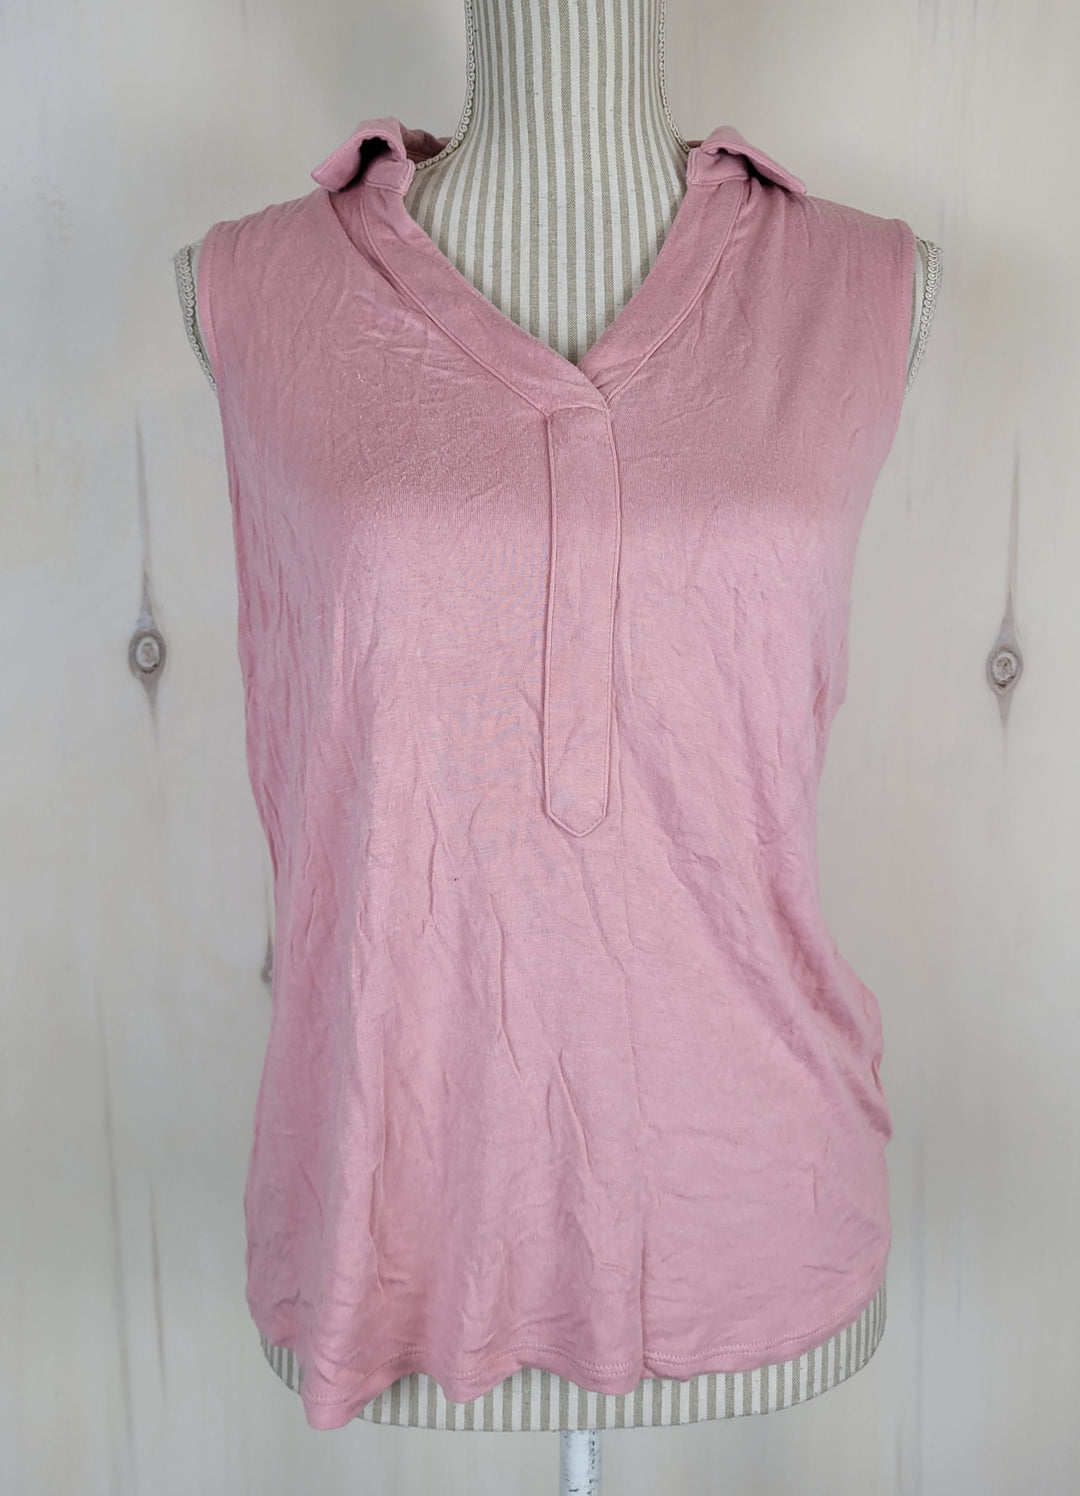 CLEO MUTED PINK STRETCH TOP LADIES SMALL EUC